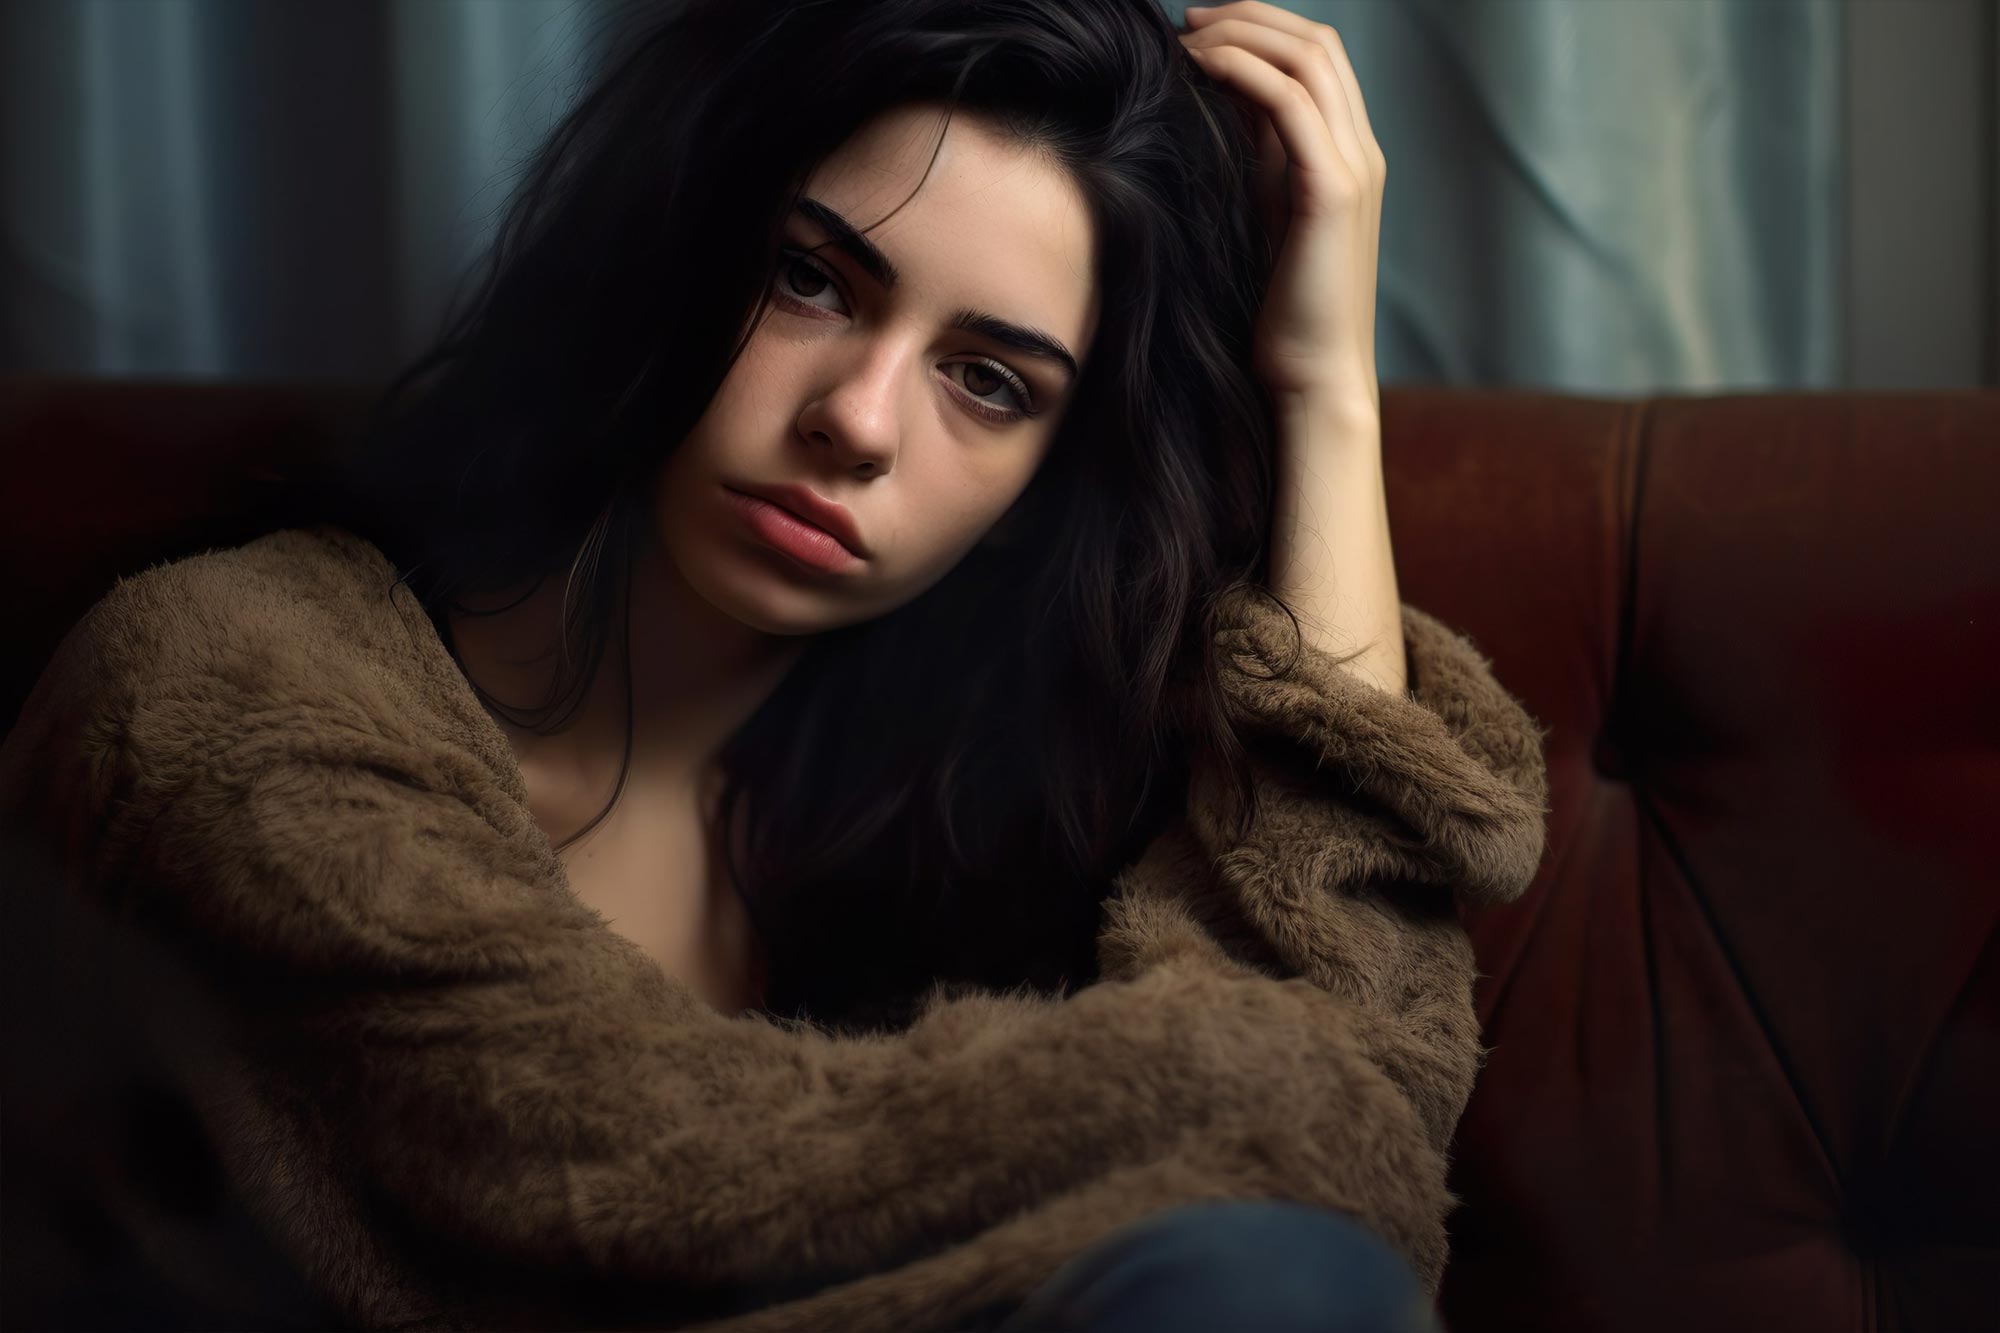 Depression Young Woman Art Concept